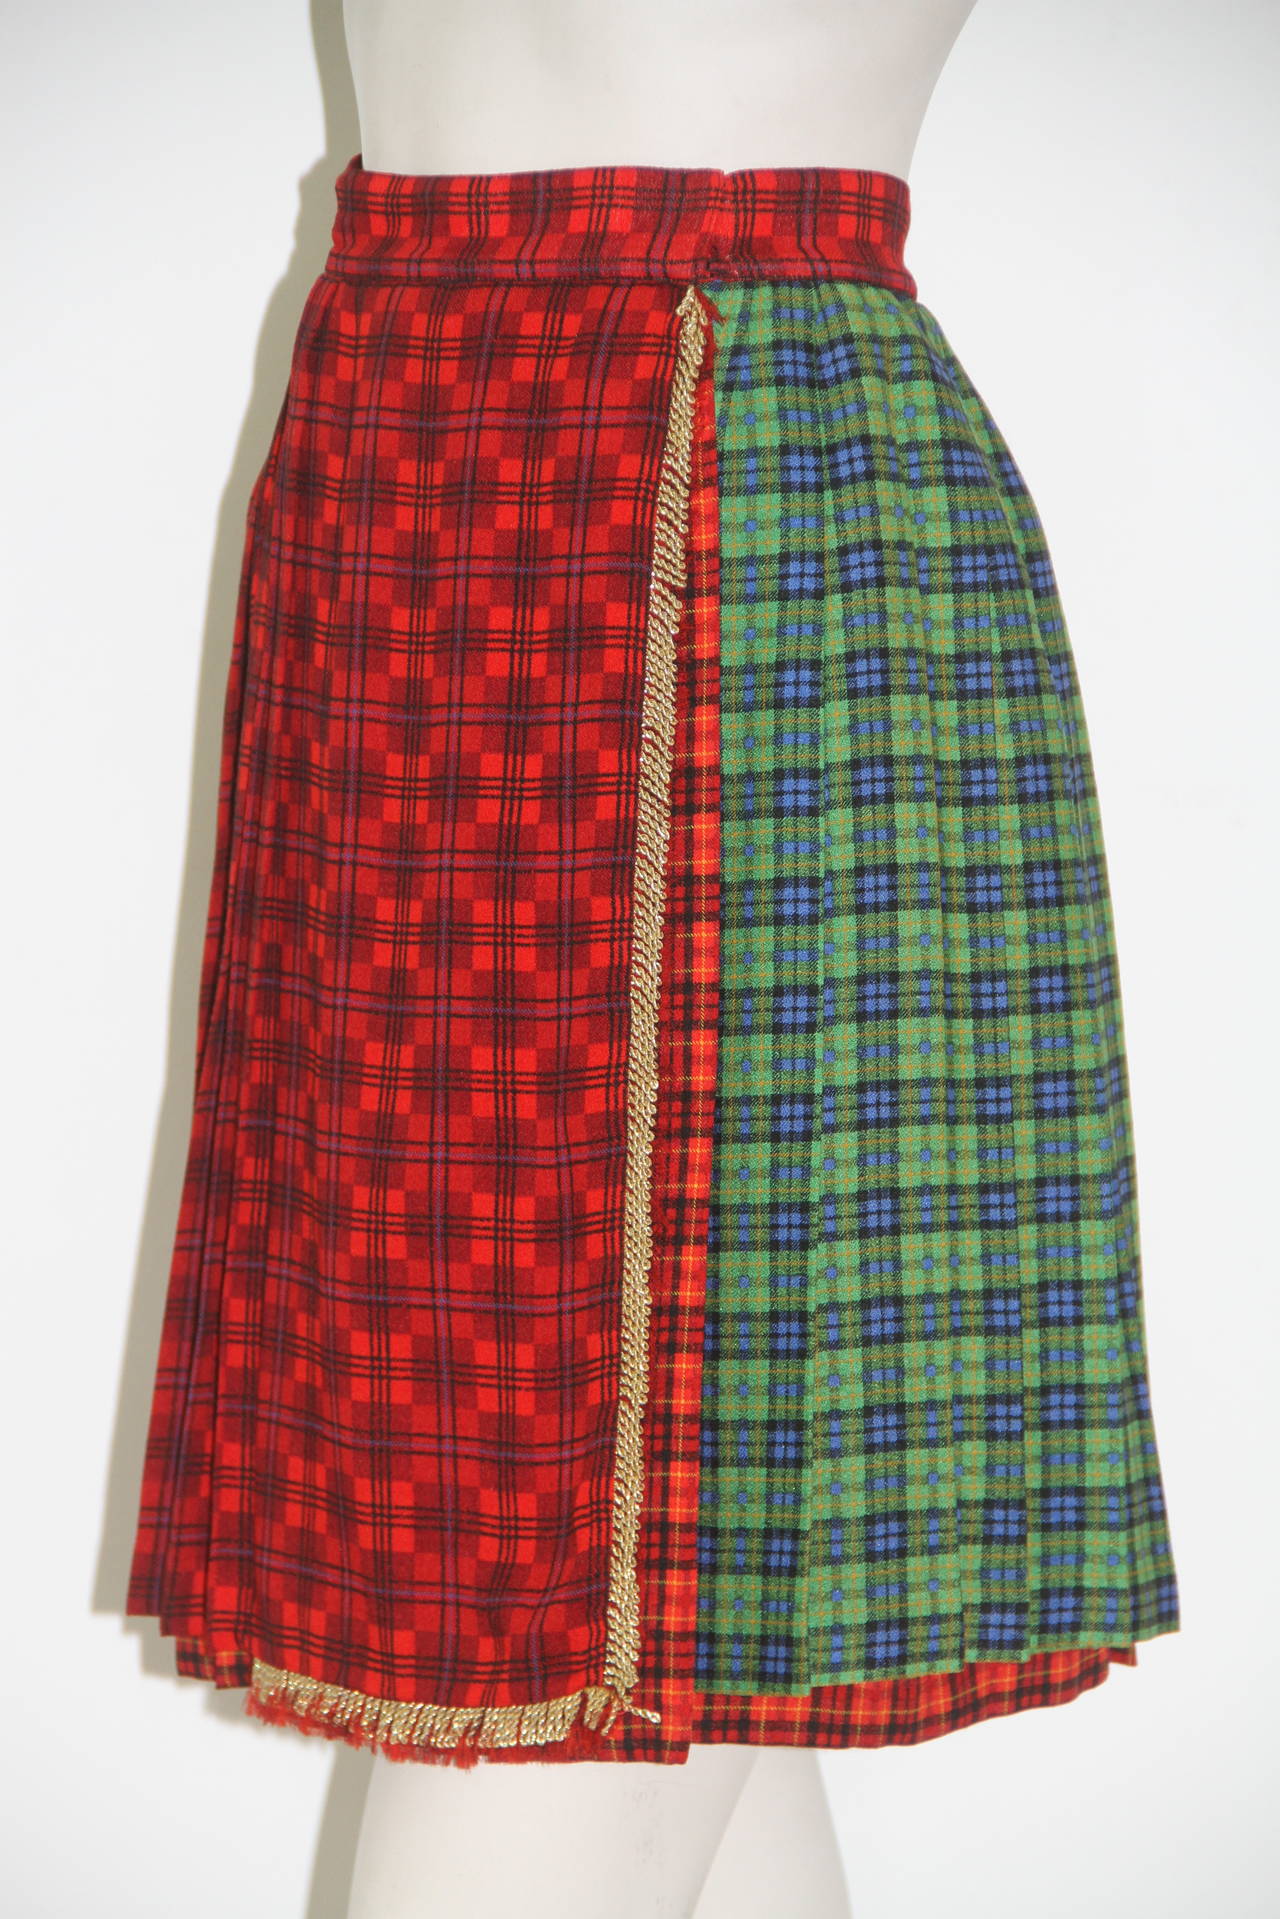 Gianni Versace wool and silk tartan pleated skirt with gold braid detailing from the Fall 1992 Bondage collection.

Marked an Italian size 40.

Manufacturer - Alias S.p.a.

Fabric content - 46% wool / 10% silk /